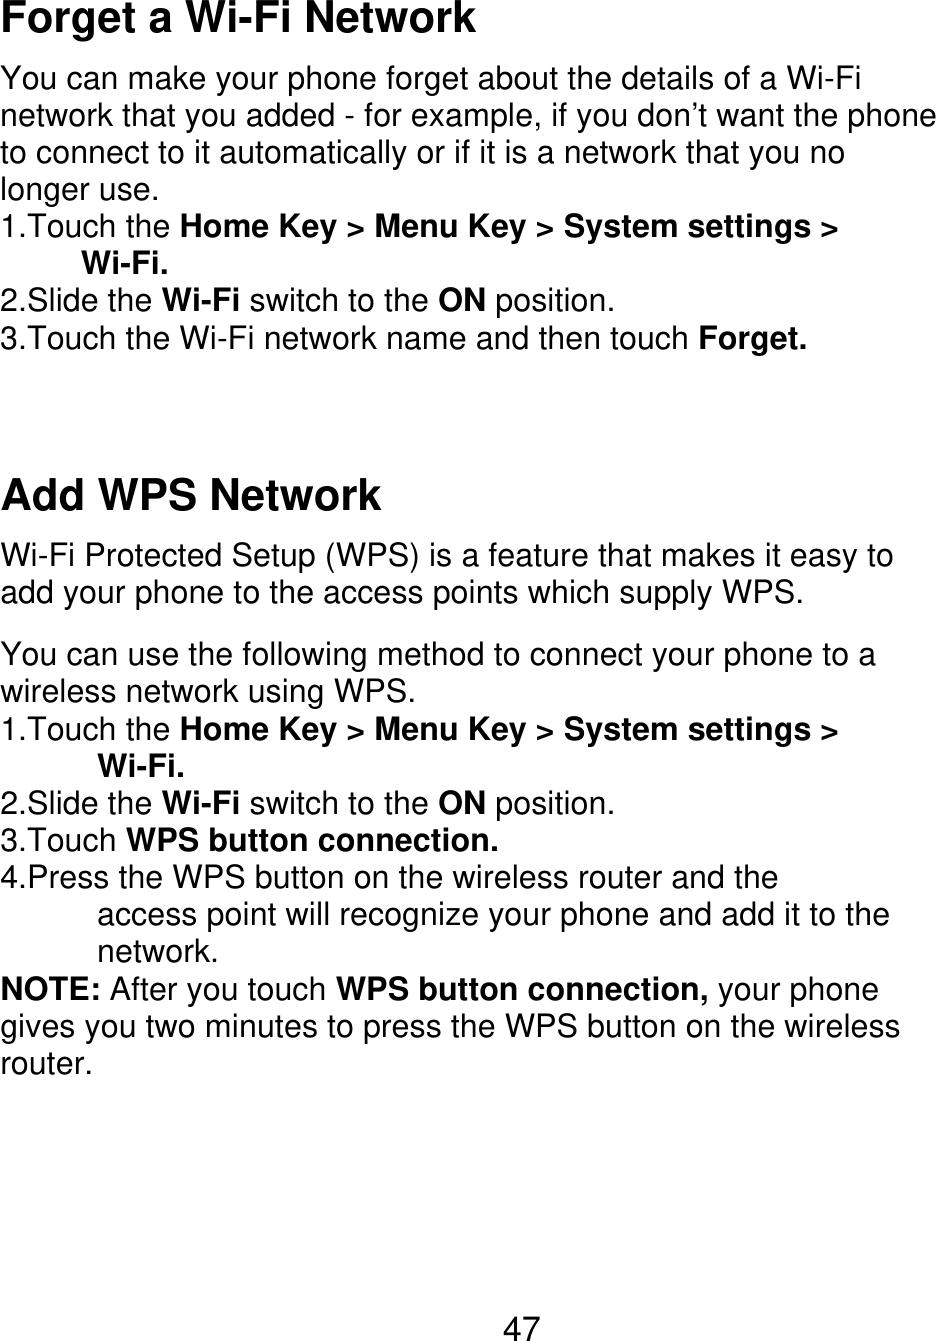 Forget a Wi-Fi Network You can make your phone forget about the details of a Wi-Fi network that you added - for example, if you don’t want the phone to connect to it automatically or if it is a network that you no longer use. 1.Touch the Home Key &gt; Menu Key &gt; System settings &gt;      Wi-Fi. 2.Slide the Wi-Fi switch to the ON position. 3.Touch the Wi-Fi network name and then touch Forget. Add WPS Network Wi-Fi Protected Setup (WPS) is a feature that makes it easy to add your phone to the access points which supply WPS. You can use the following method to connect your phone to a wireless network using WPS. 1.Touch the Home Key &gt; Menu Key &gt; System settings &gt;       Wi-Fi. 2.Slide the Wi-Fi switch to the ON position. 3.Touch WPS button connection. 4.Press the WPS button on the wireless router and the       access point will recognize your phone and add it to the       network. NOTE: After you touch WPS button connection, your phone gives you two minutes to press the WPS button on the wireless router. 47 